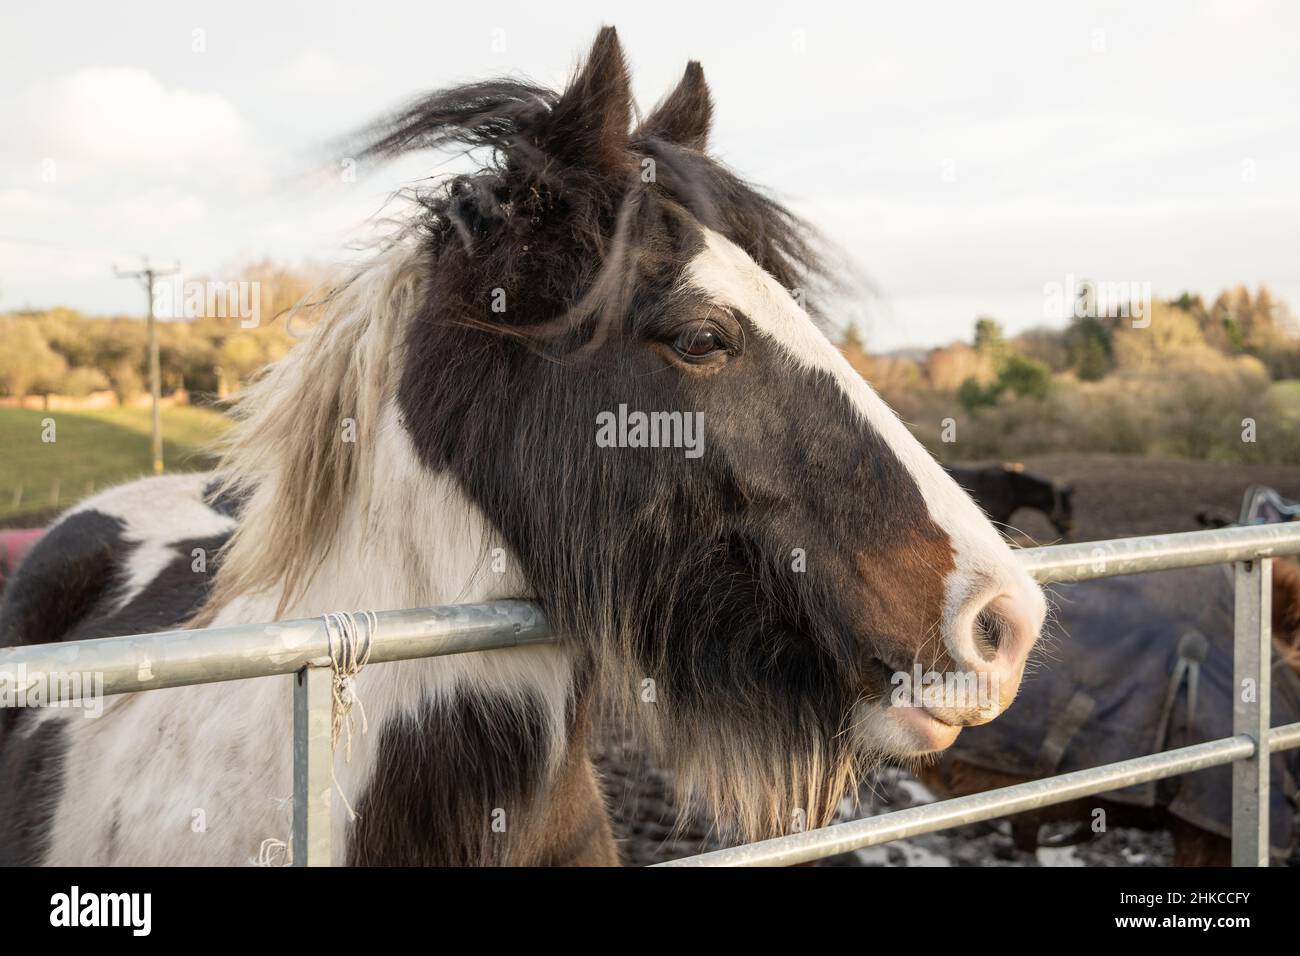 A Gypsy Cob or Gypsy Vanner breed of skewbald horse looks over a fence in the countryside. Stock Photo